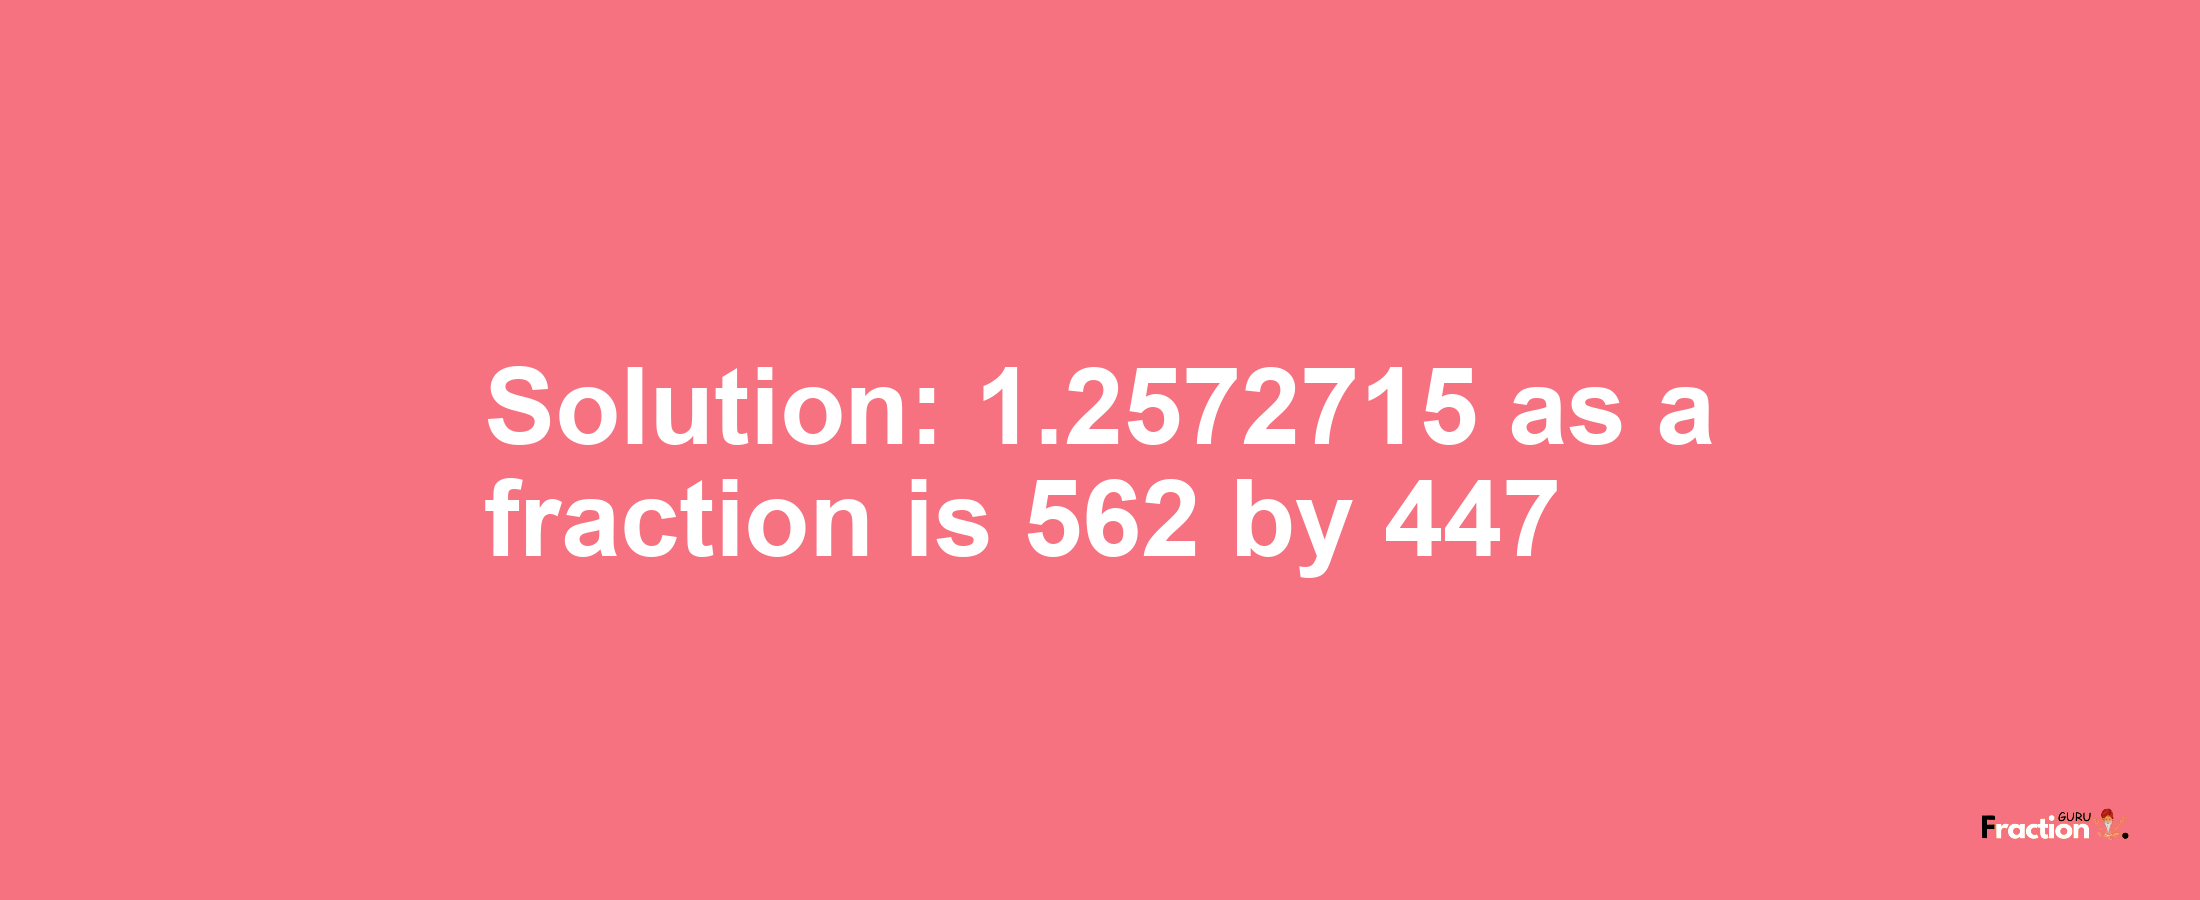 Solution:1.2572715 as a fraction is 562/447